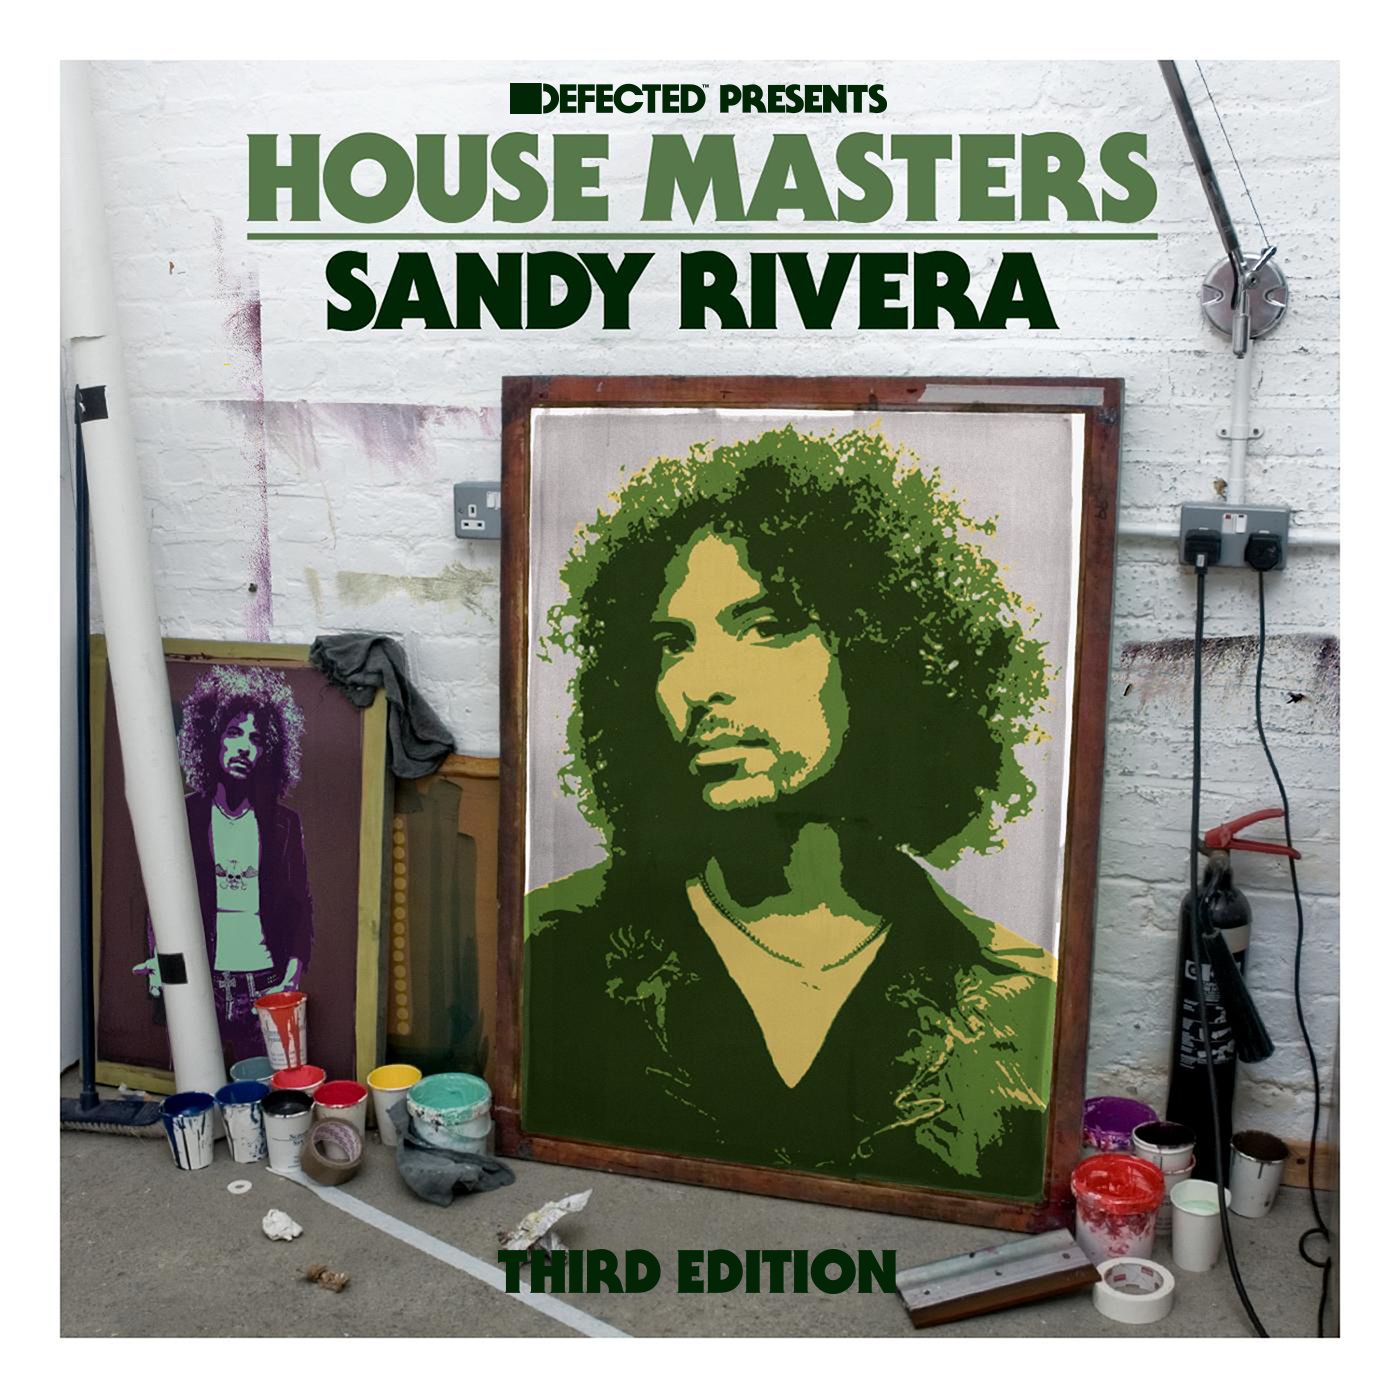 Defected Presents House Masters - Sandy Rivera (Third Edition) (Third Edition)